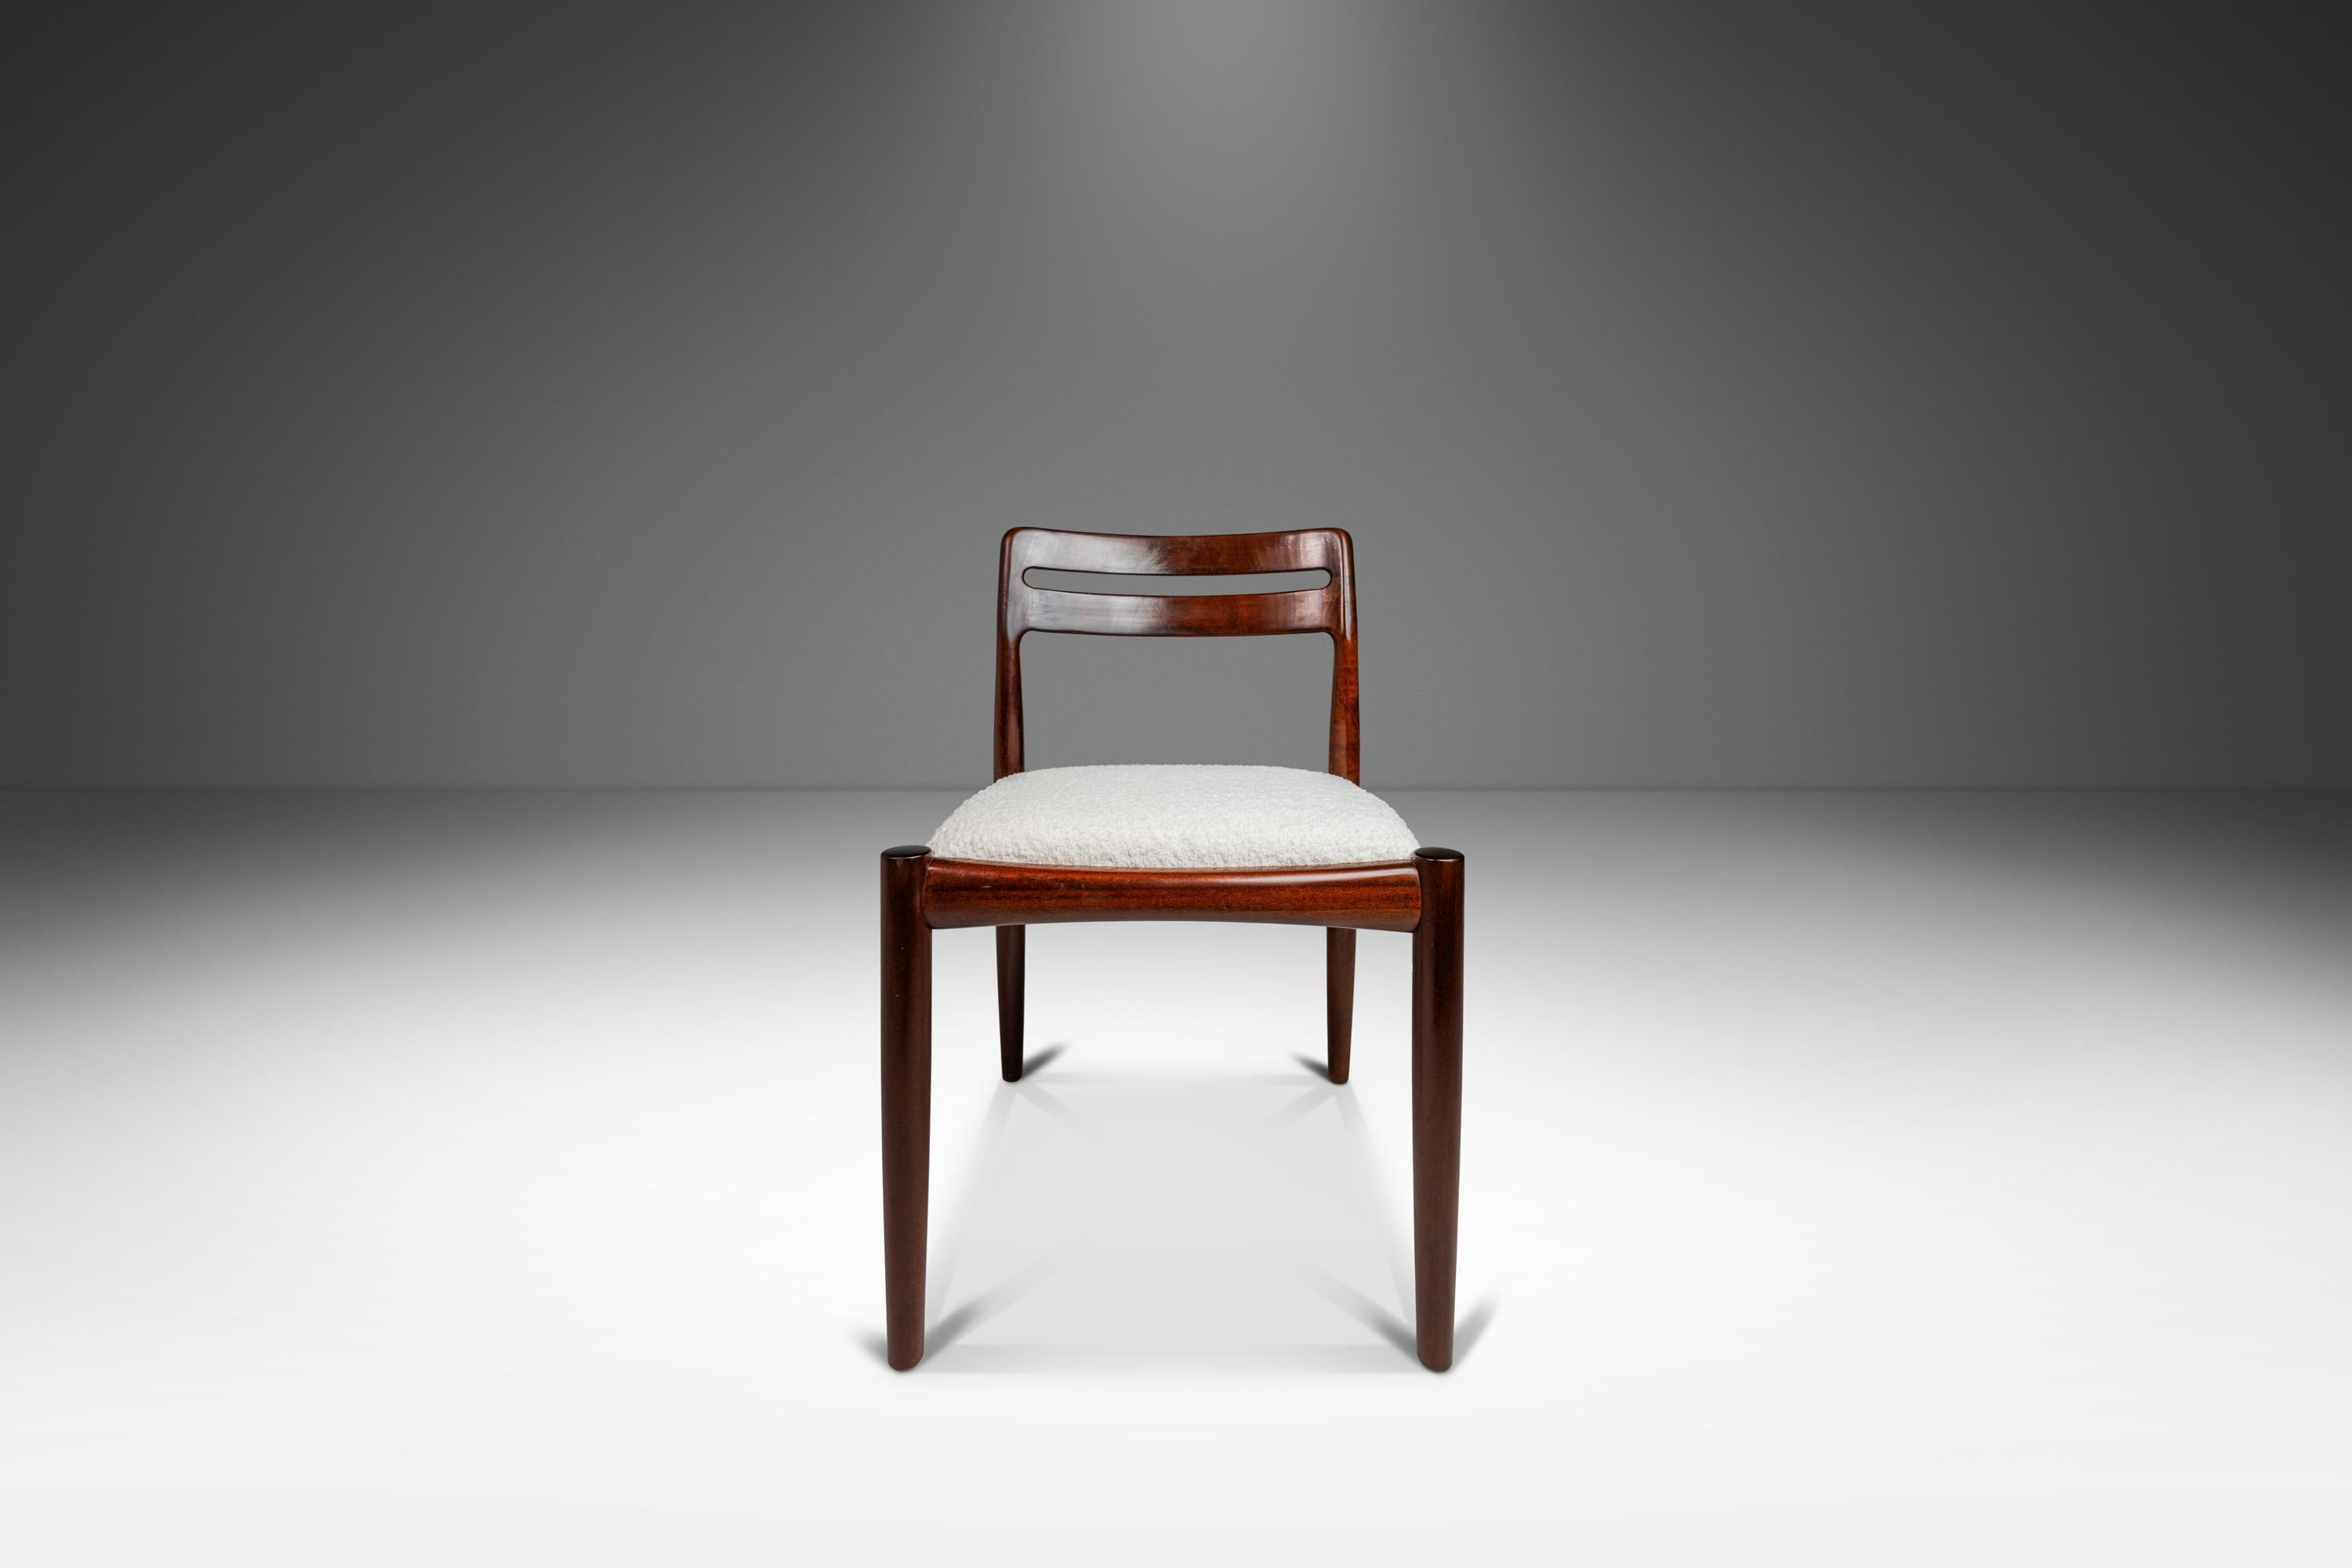 Set of 4 Model 382 Dining Chairs in Mahogany by H.W. Klein, Denmark, c. 1960s For Sale 1